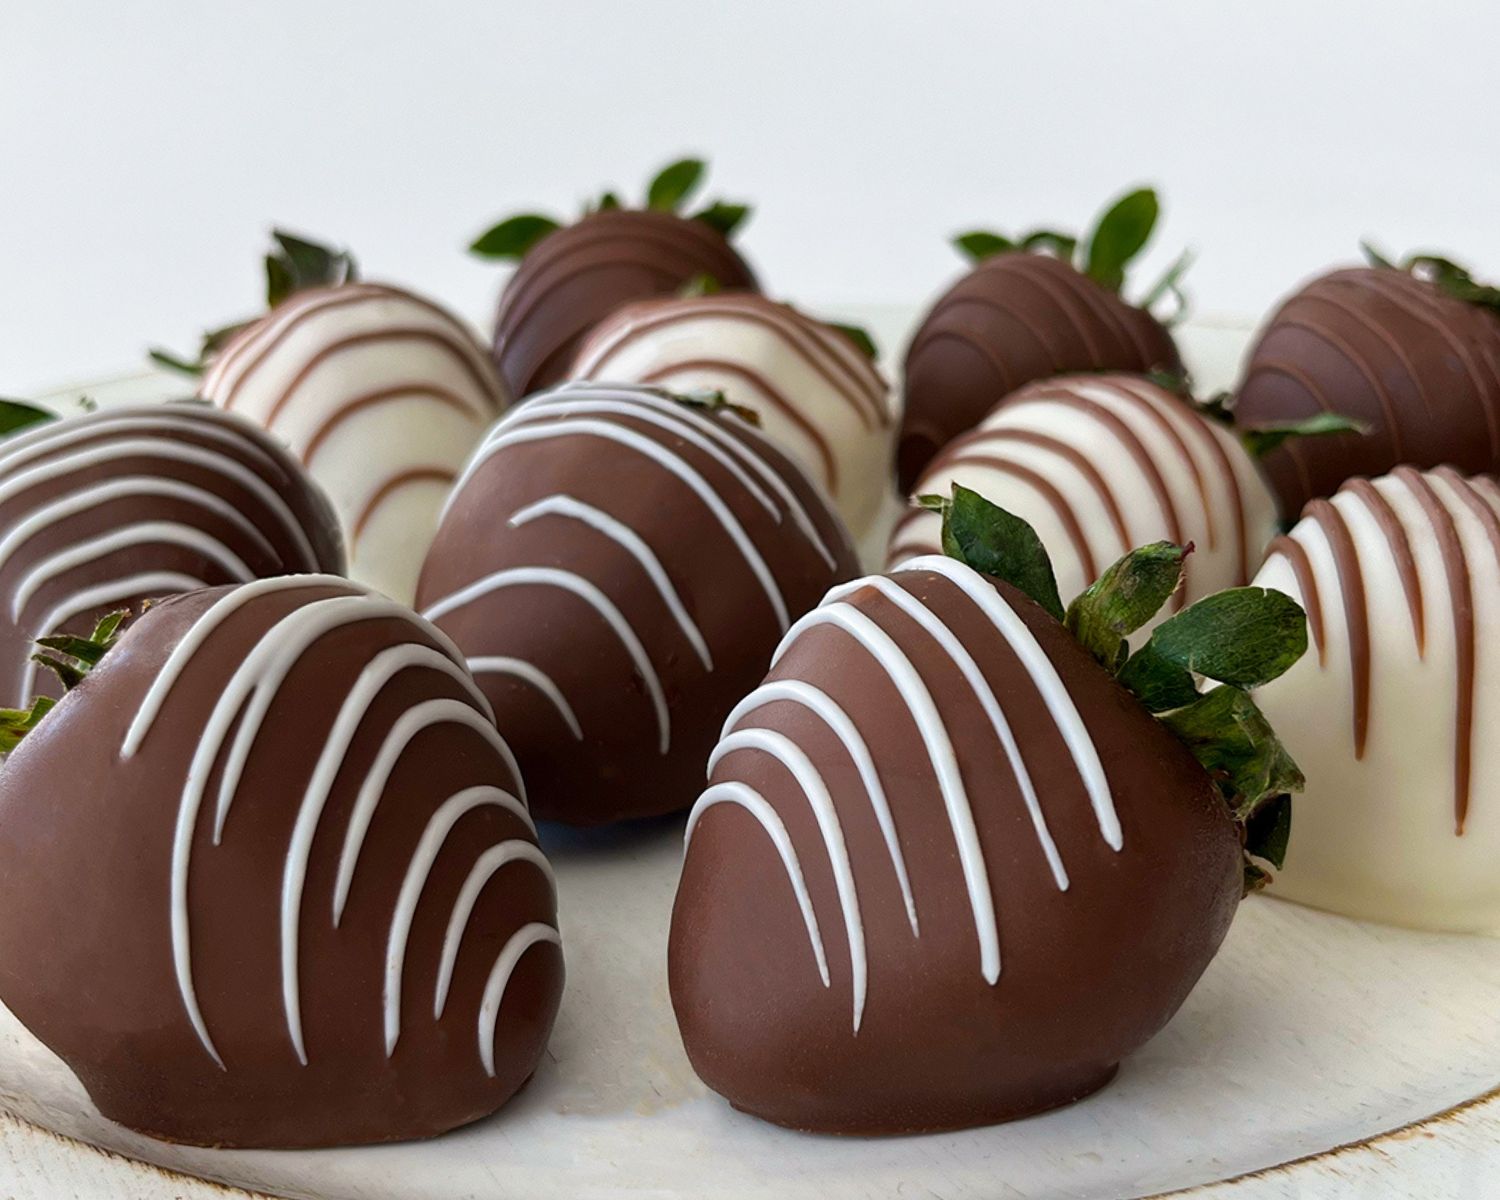 Give the Gift of Chocolate Covered Strawberries